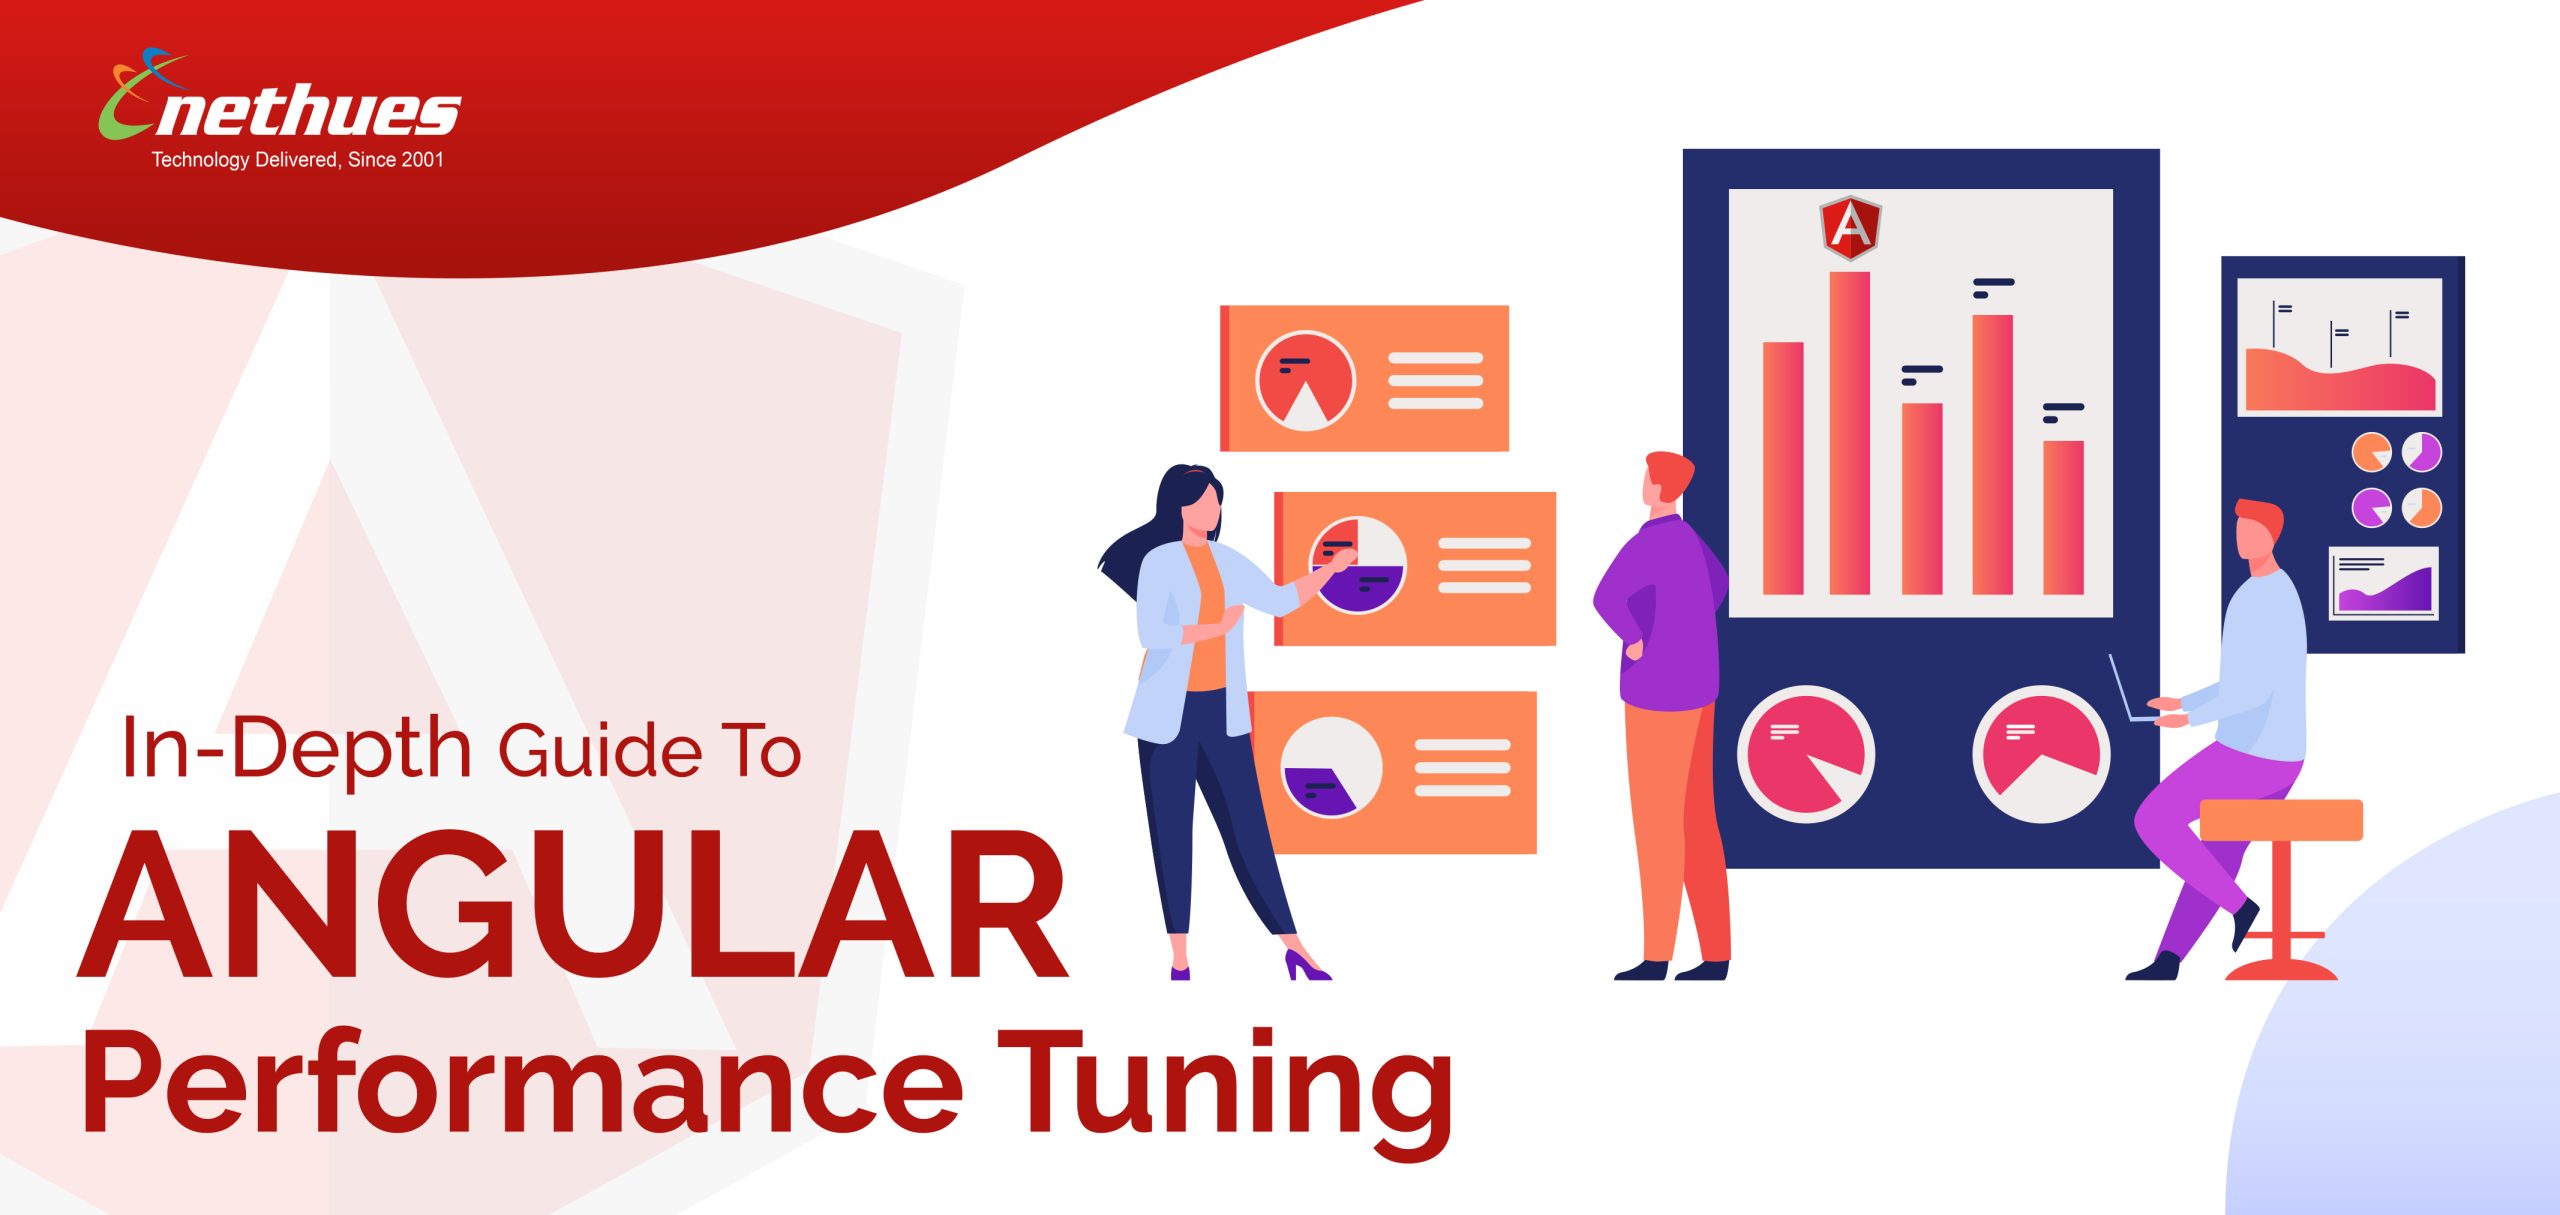 In-Depth Guide to Angular Performance Tuning: Optimize Your Apps for Maximum Performance and Scalability.